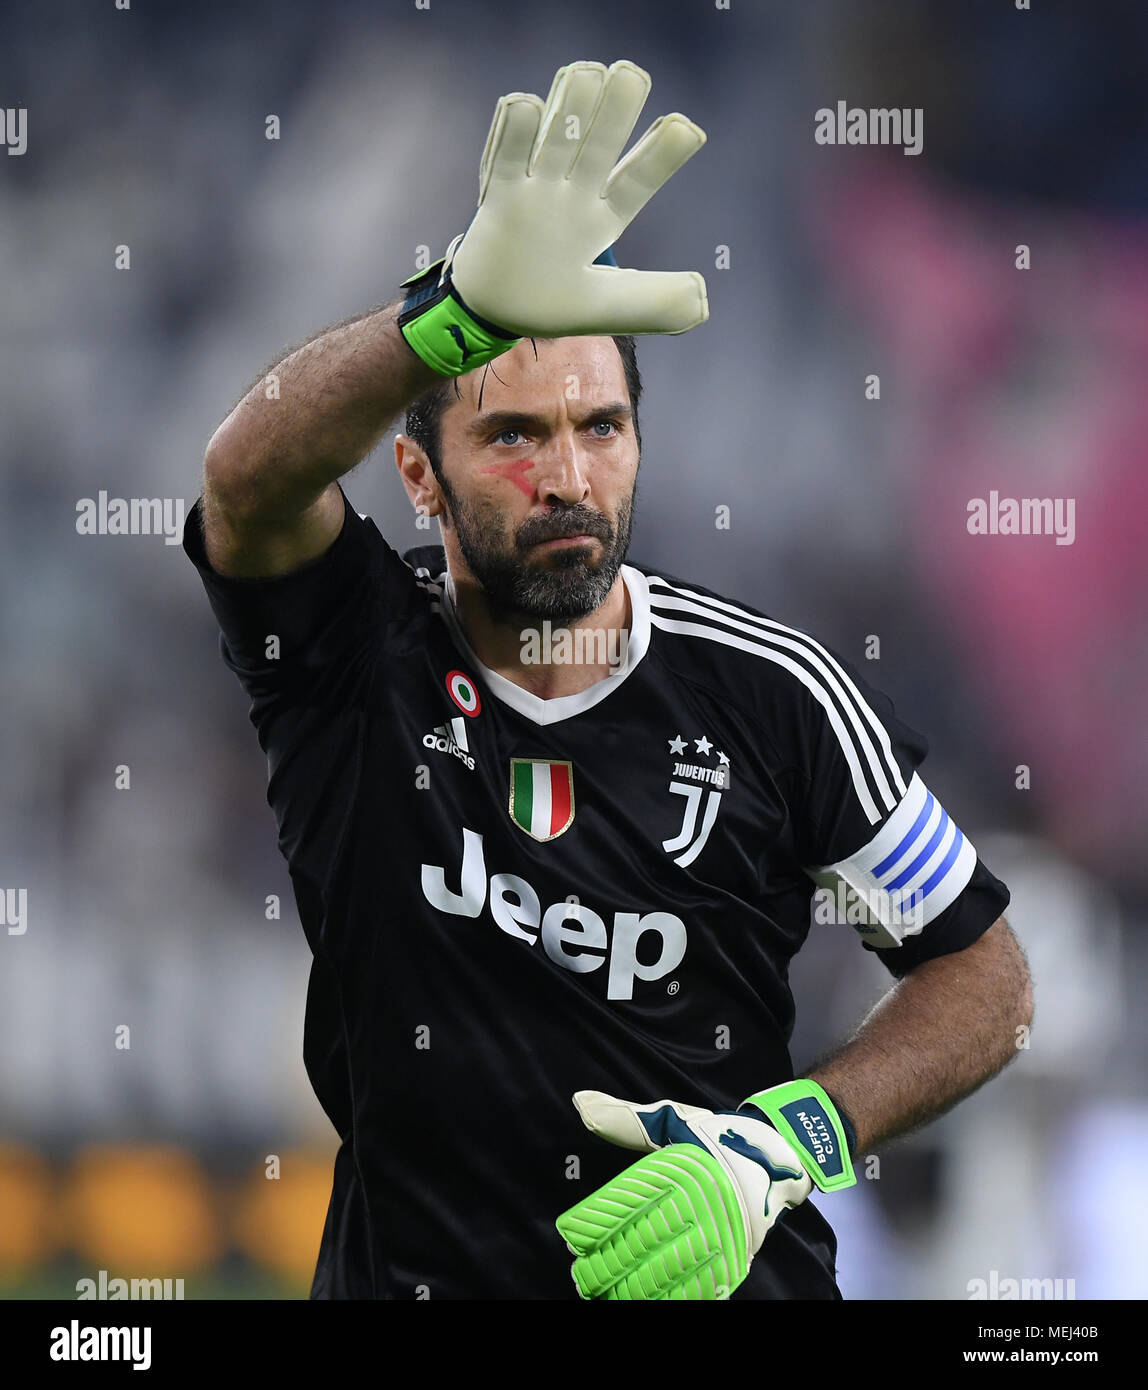 Turin, Italy. 22nd Apr, 2018. Juventus' goalkeeper Gianluigi Buffon reacts during the Serie A soccer match between Juventus and Napoli in Turin, Italy, on April 22, 2018. Napoli won 1-0. Credit: Alberto Lingria/Xinhua/Alamy Live News Stock Photo